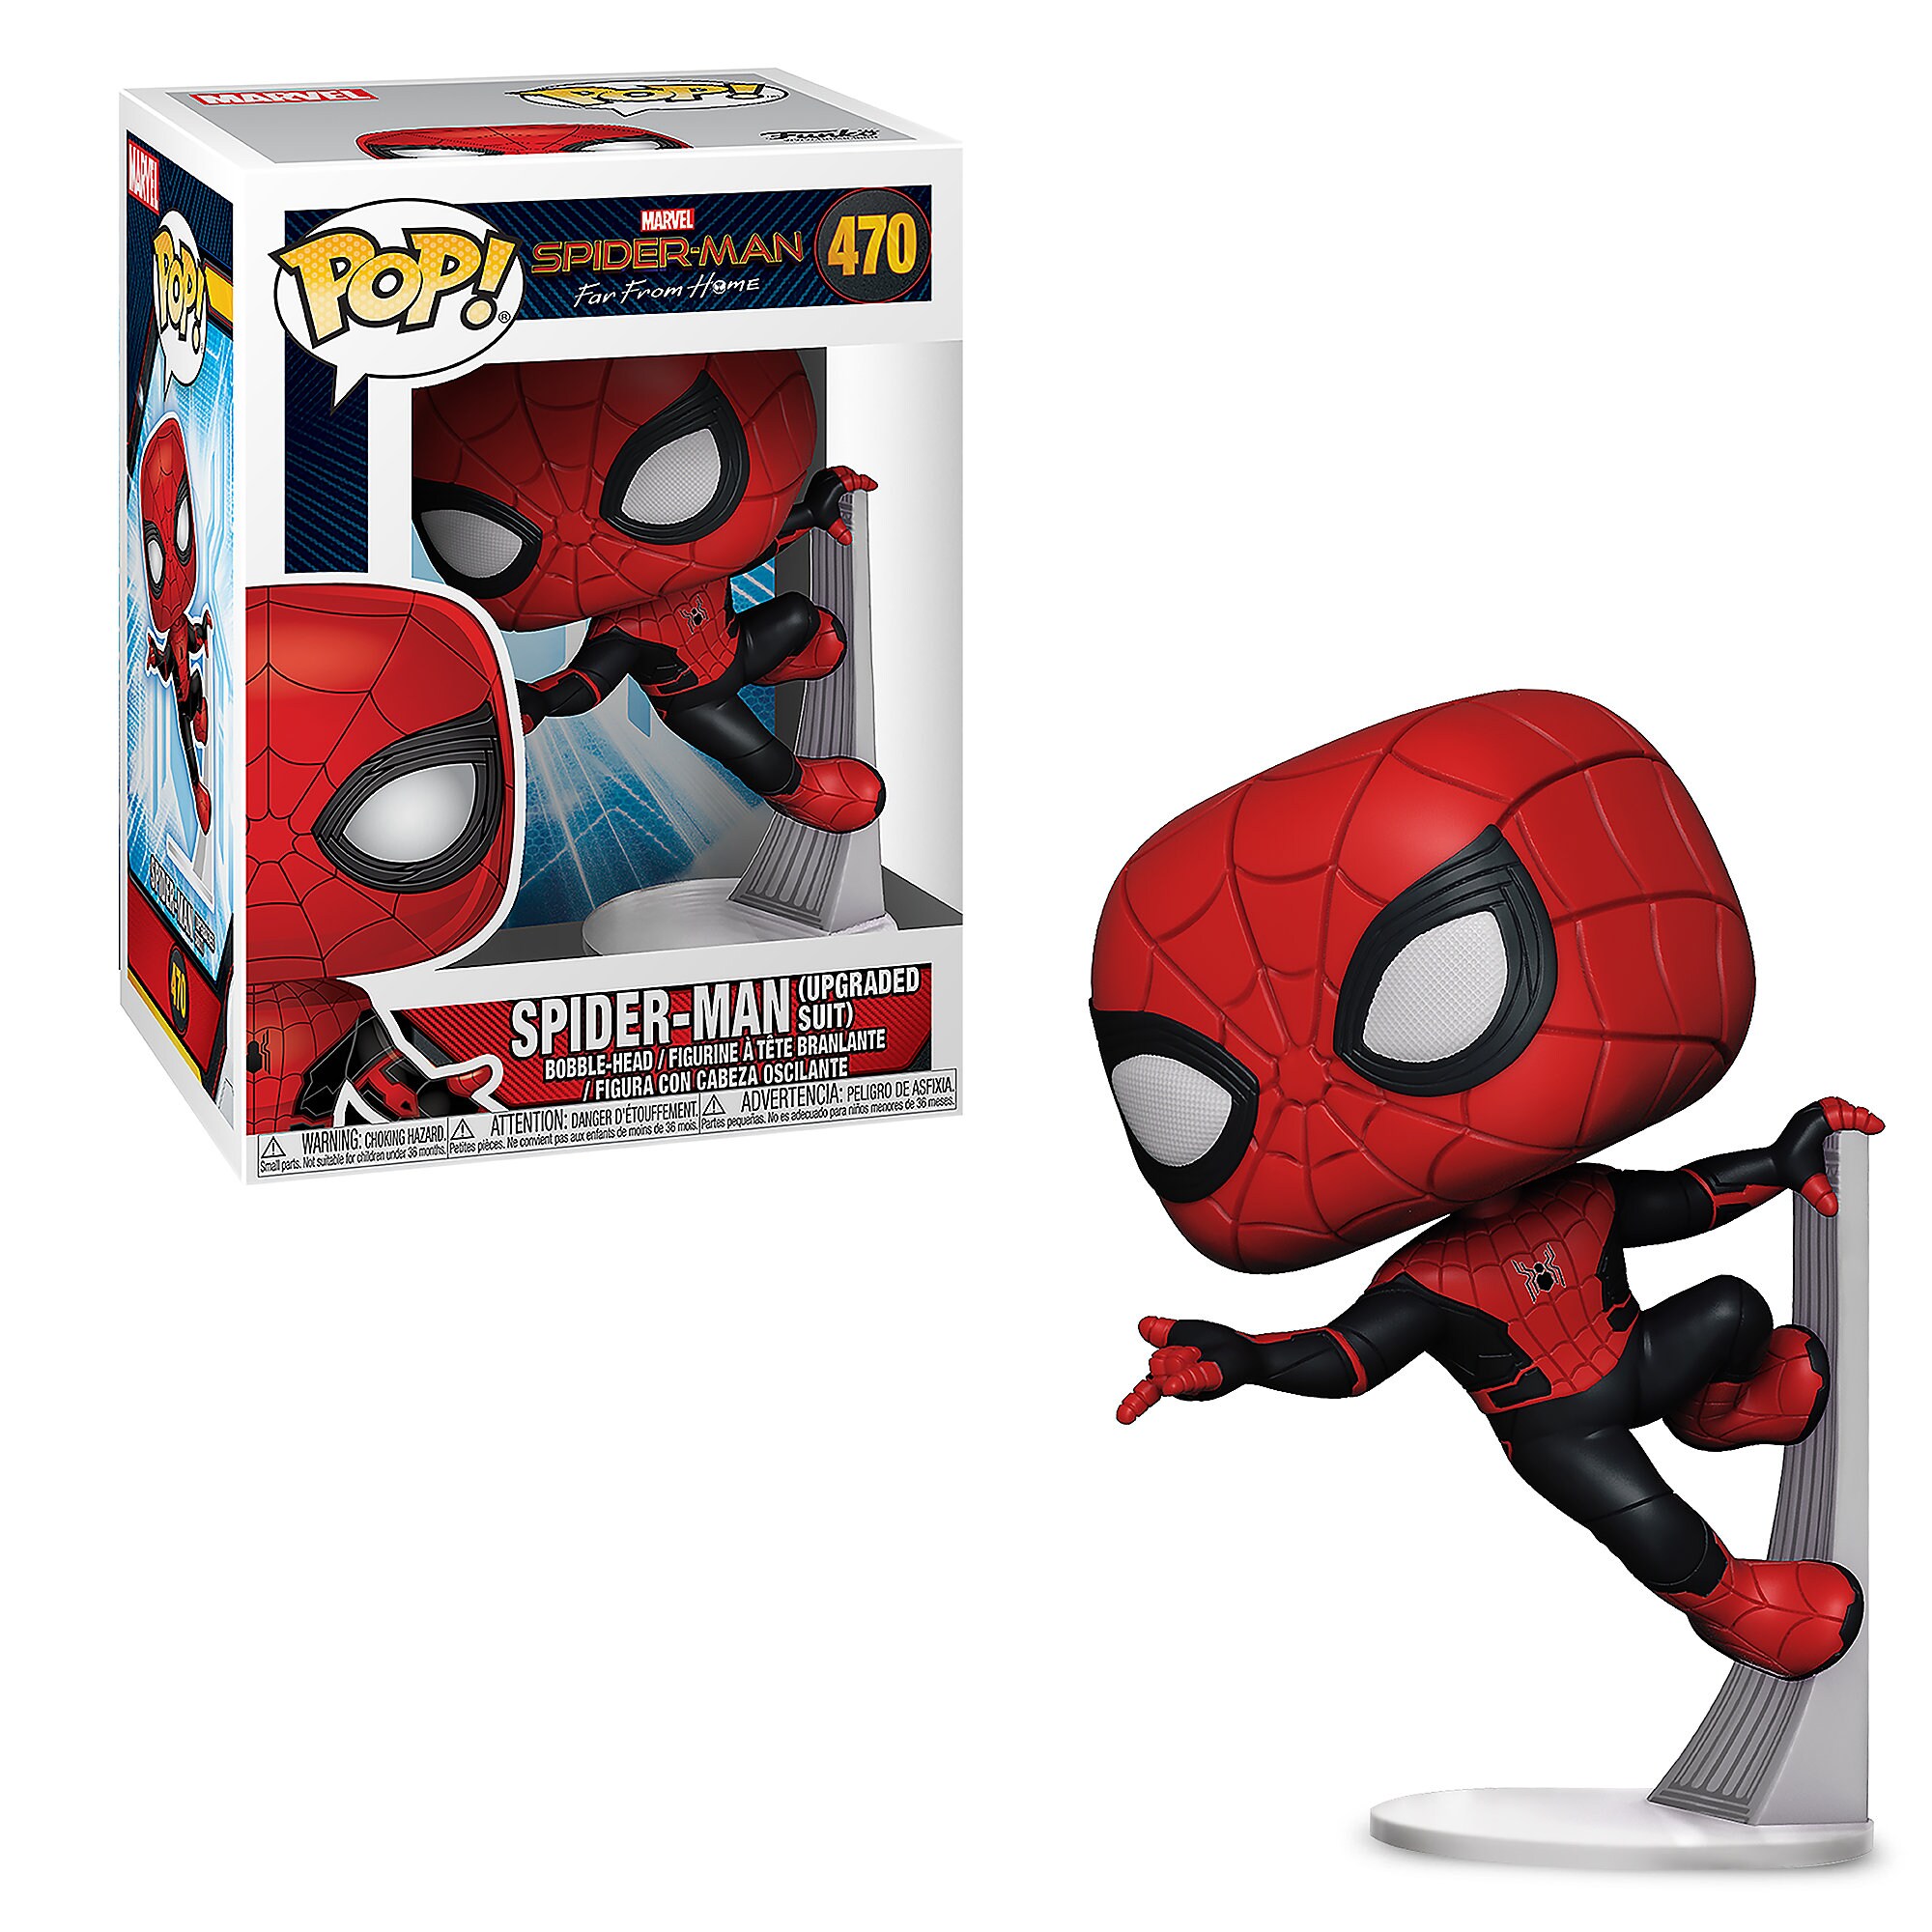 Spider-Man Upgraded Suit Pop! Vinyl Figure by Funko - Spider-Man: Far from Home